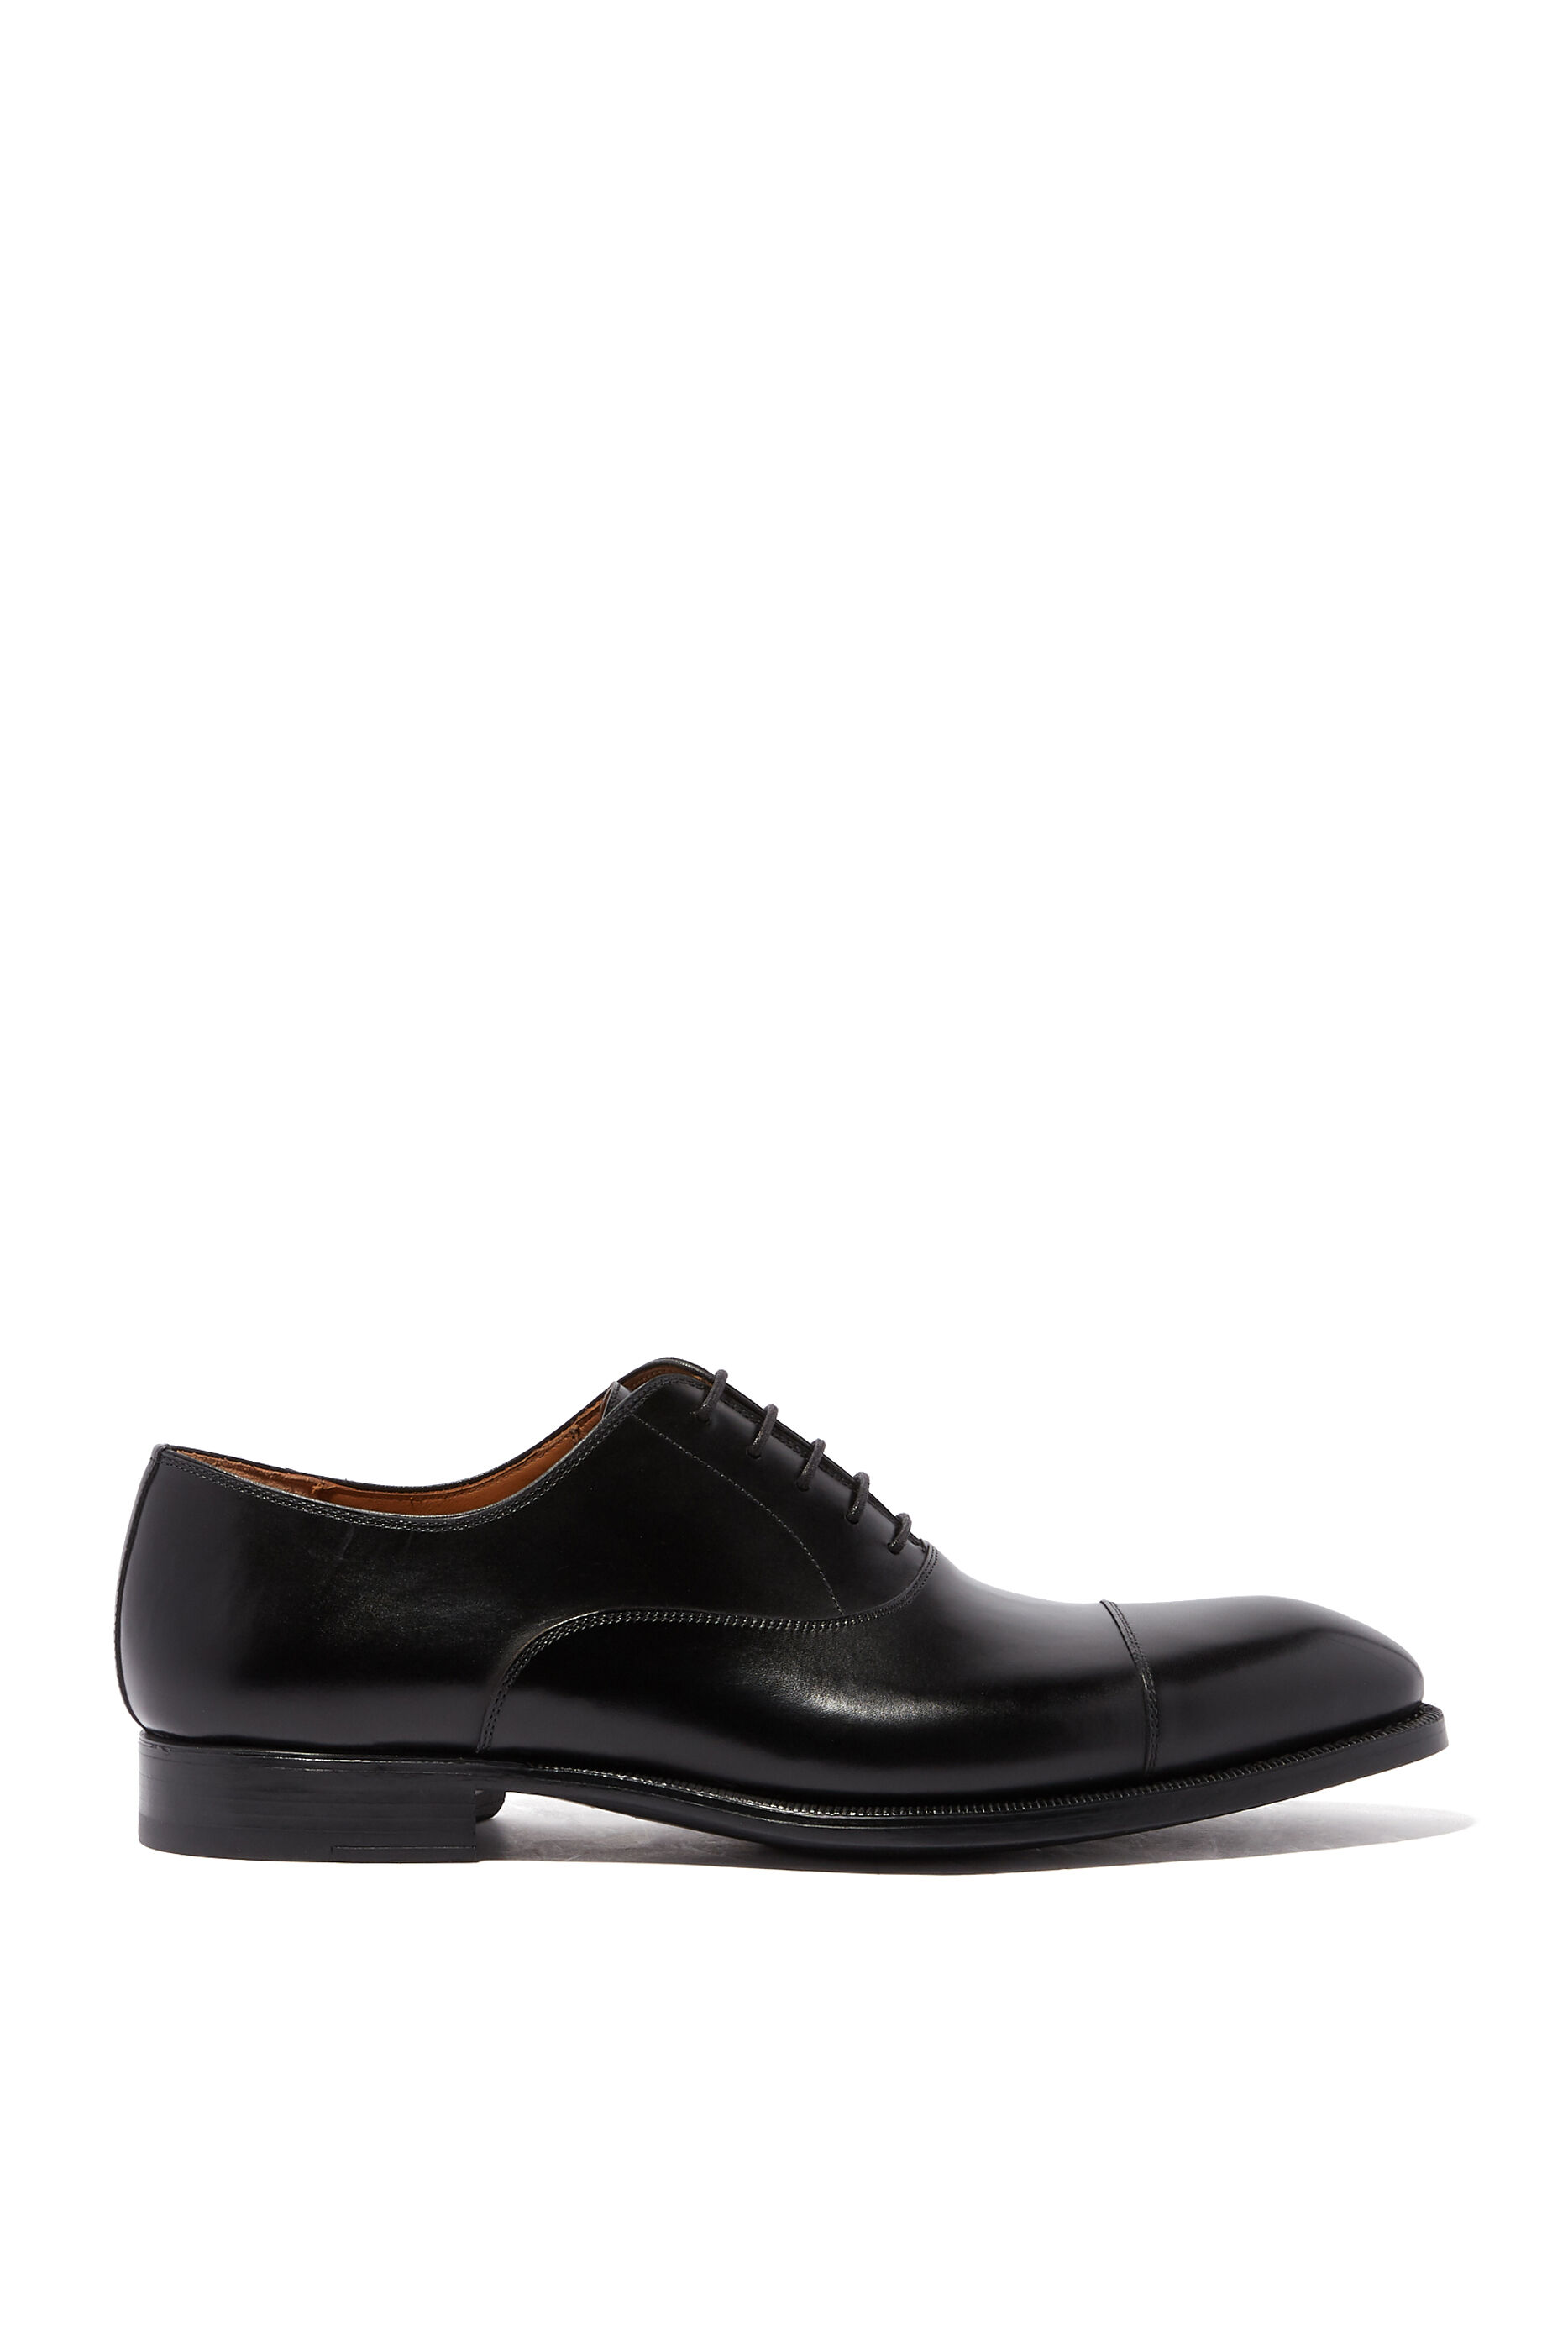 magnanni patent leather shoes